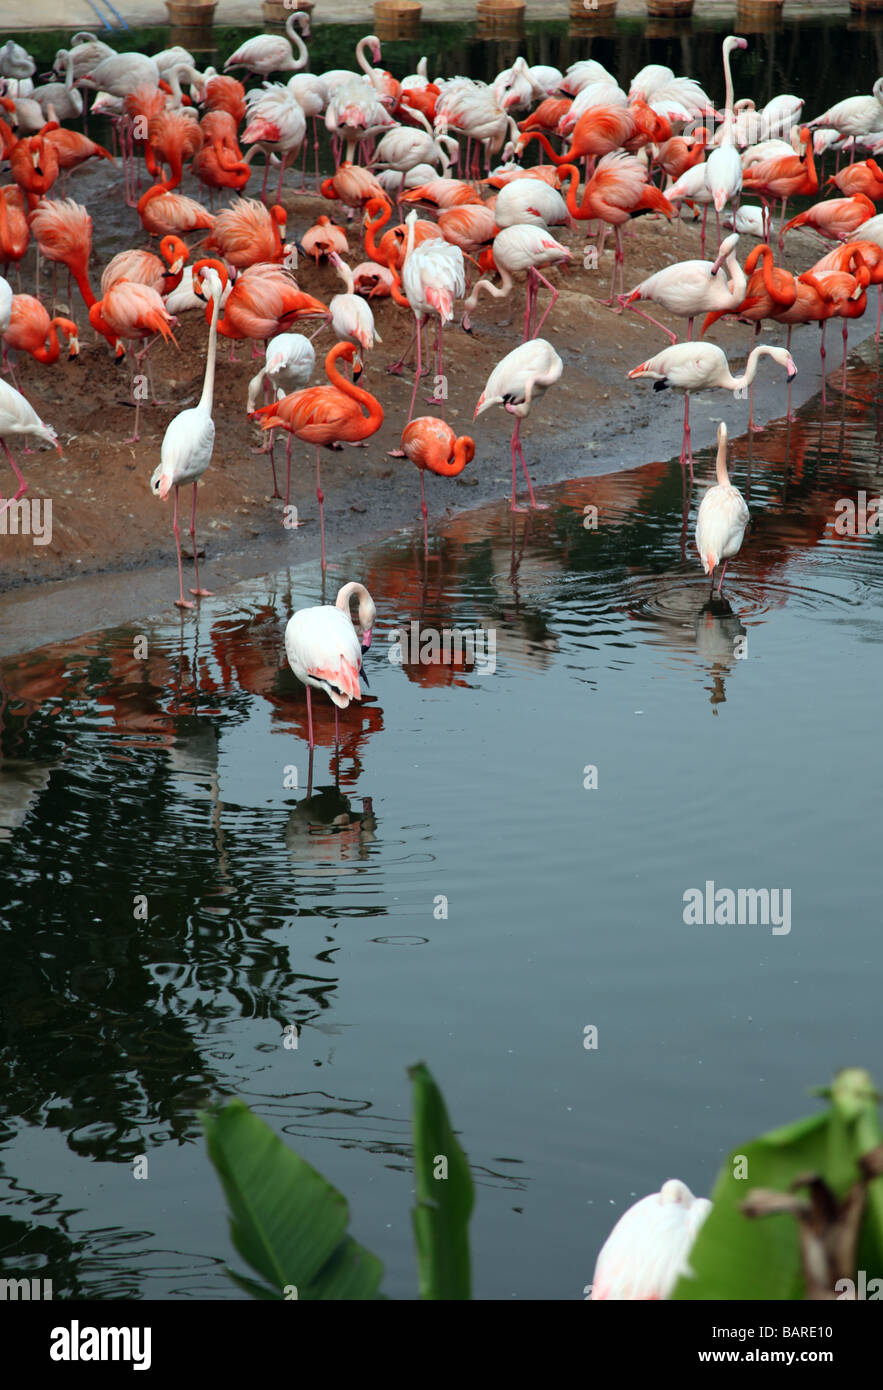 pink flamingo near the river having rest in a zoo. there is white flamingo too. Some are in the water, others on the bank Stock Photo